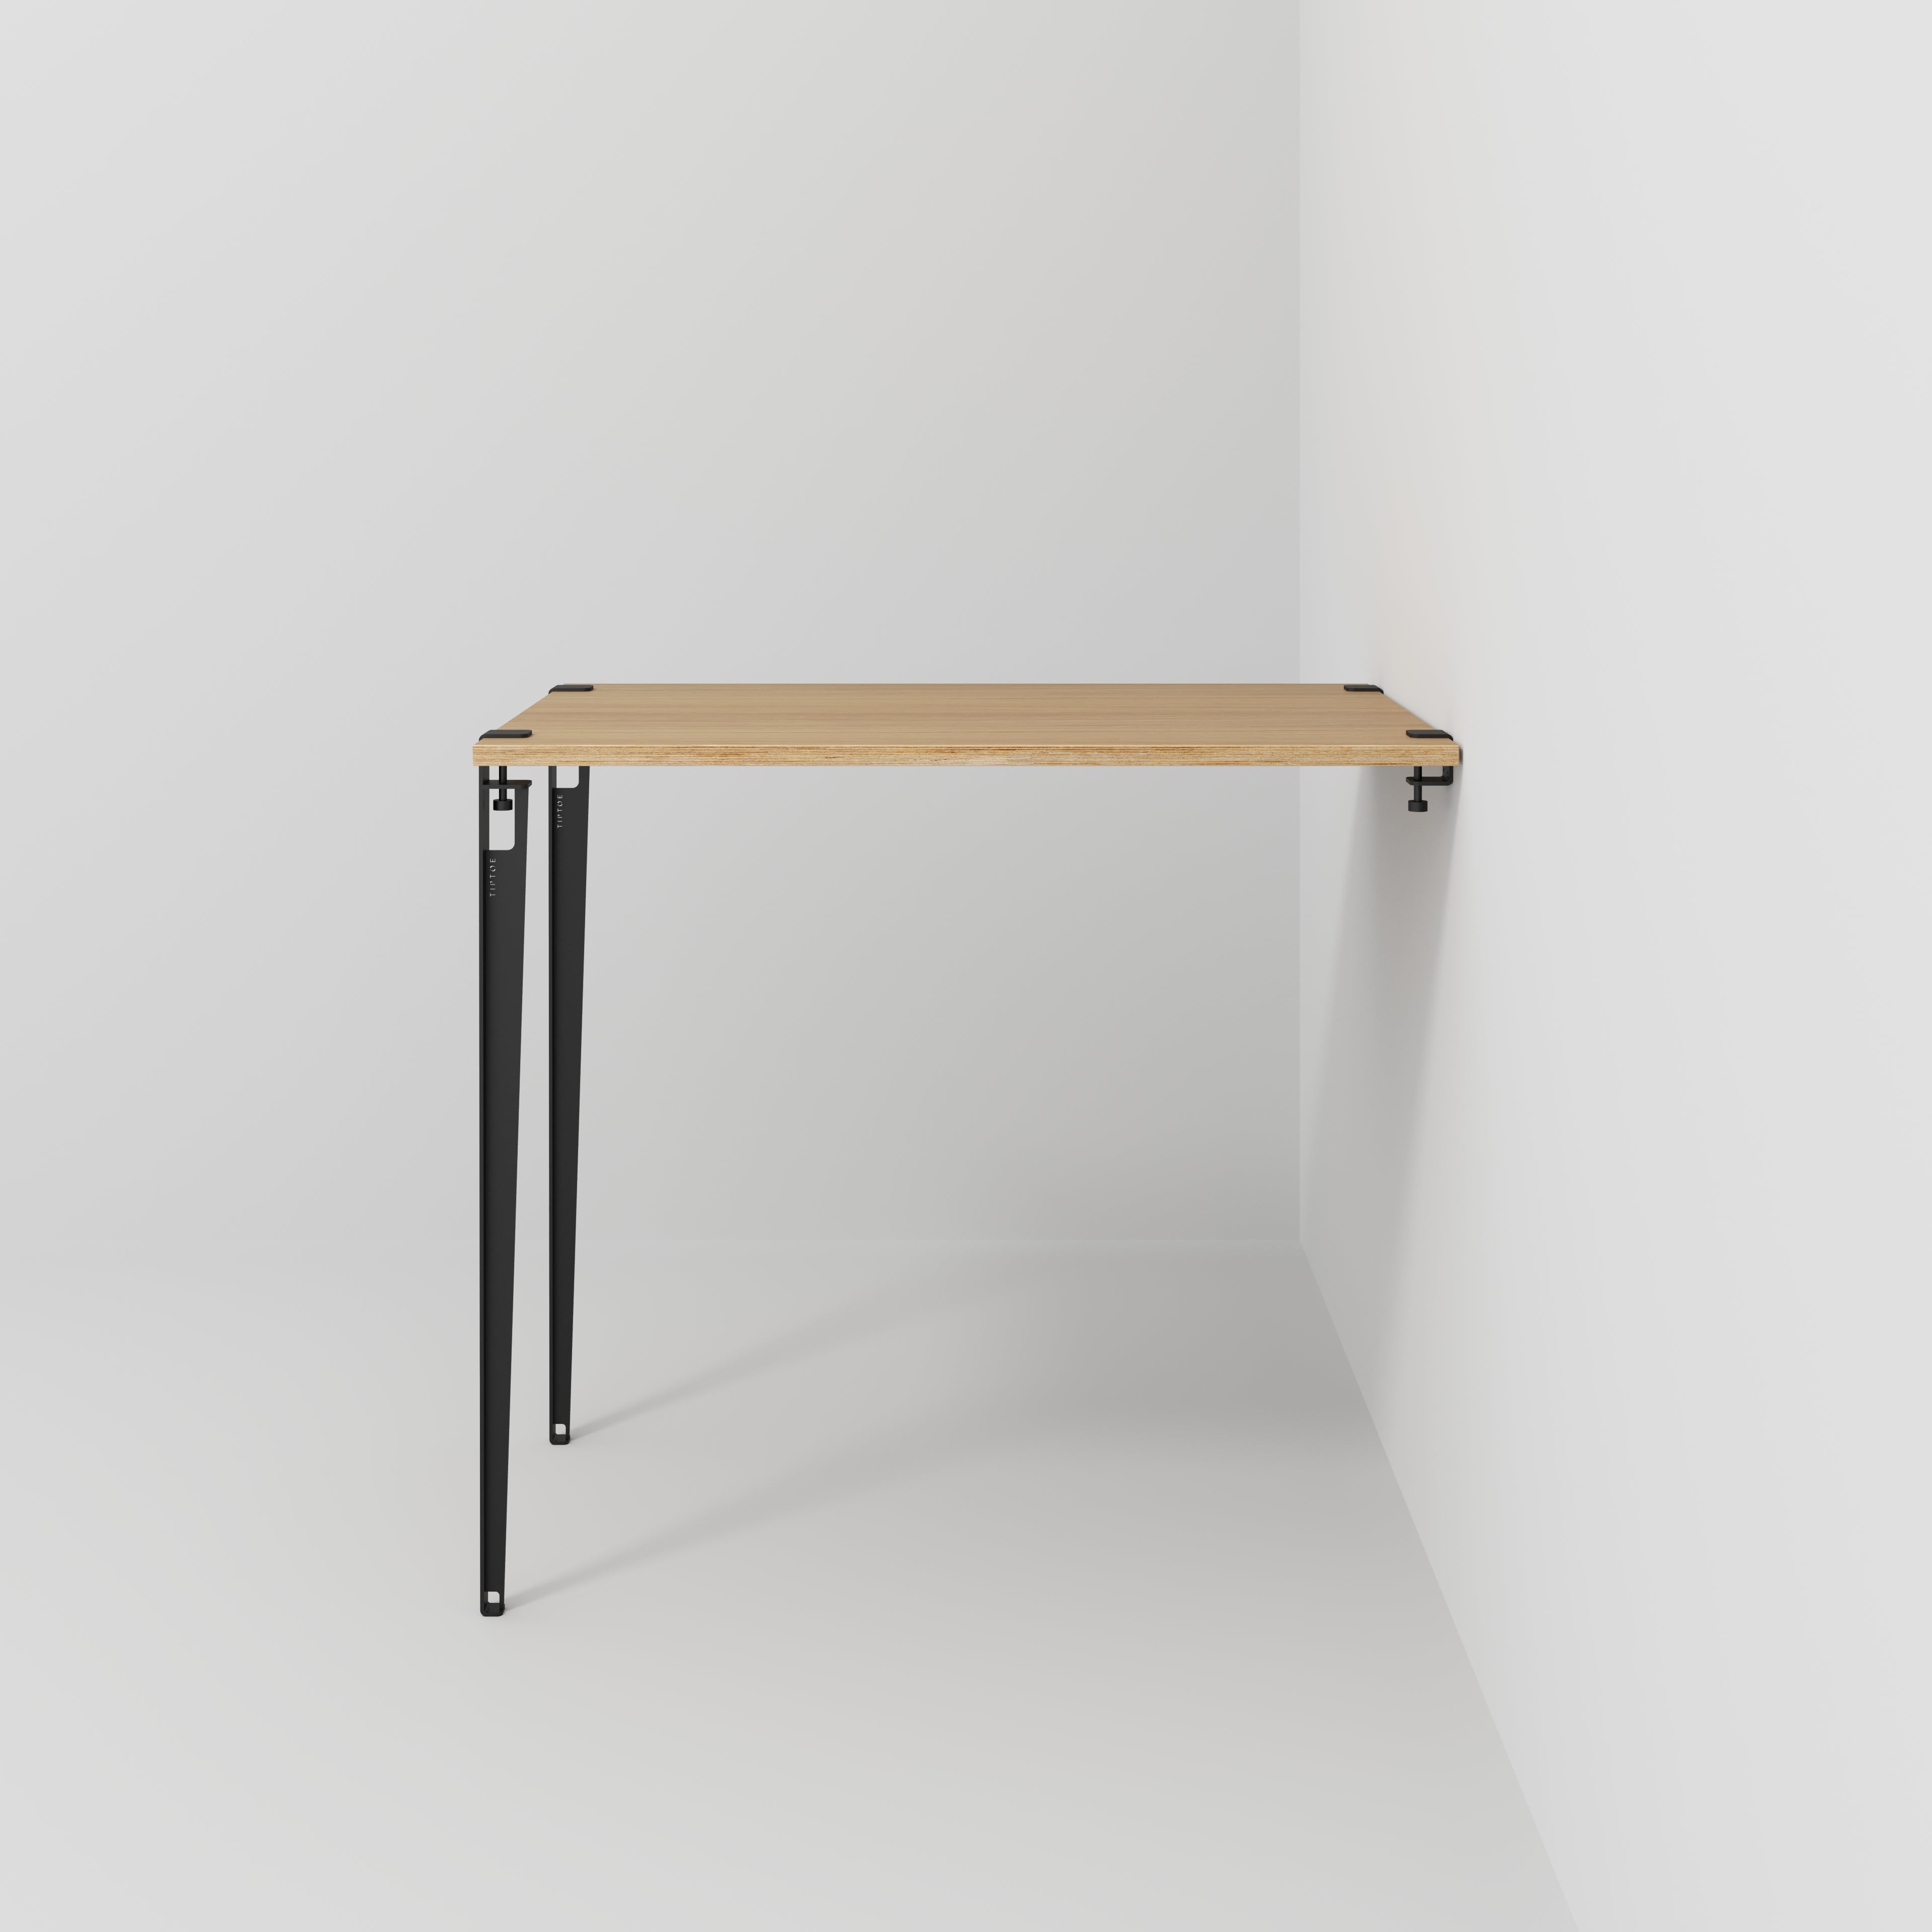 Wall Table with Black Tiptoe Legs and Brackets - Plywood Oak - 1200(w) x 800(d) x 1100(h)